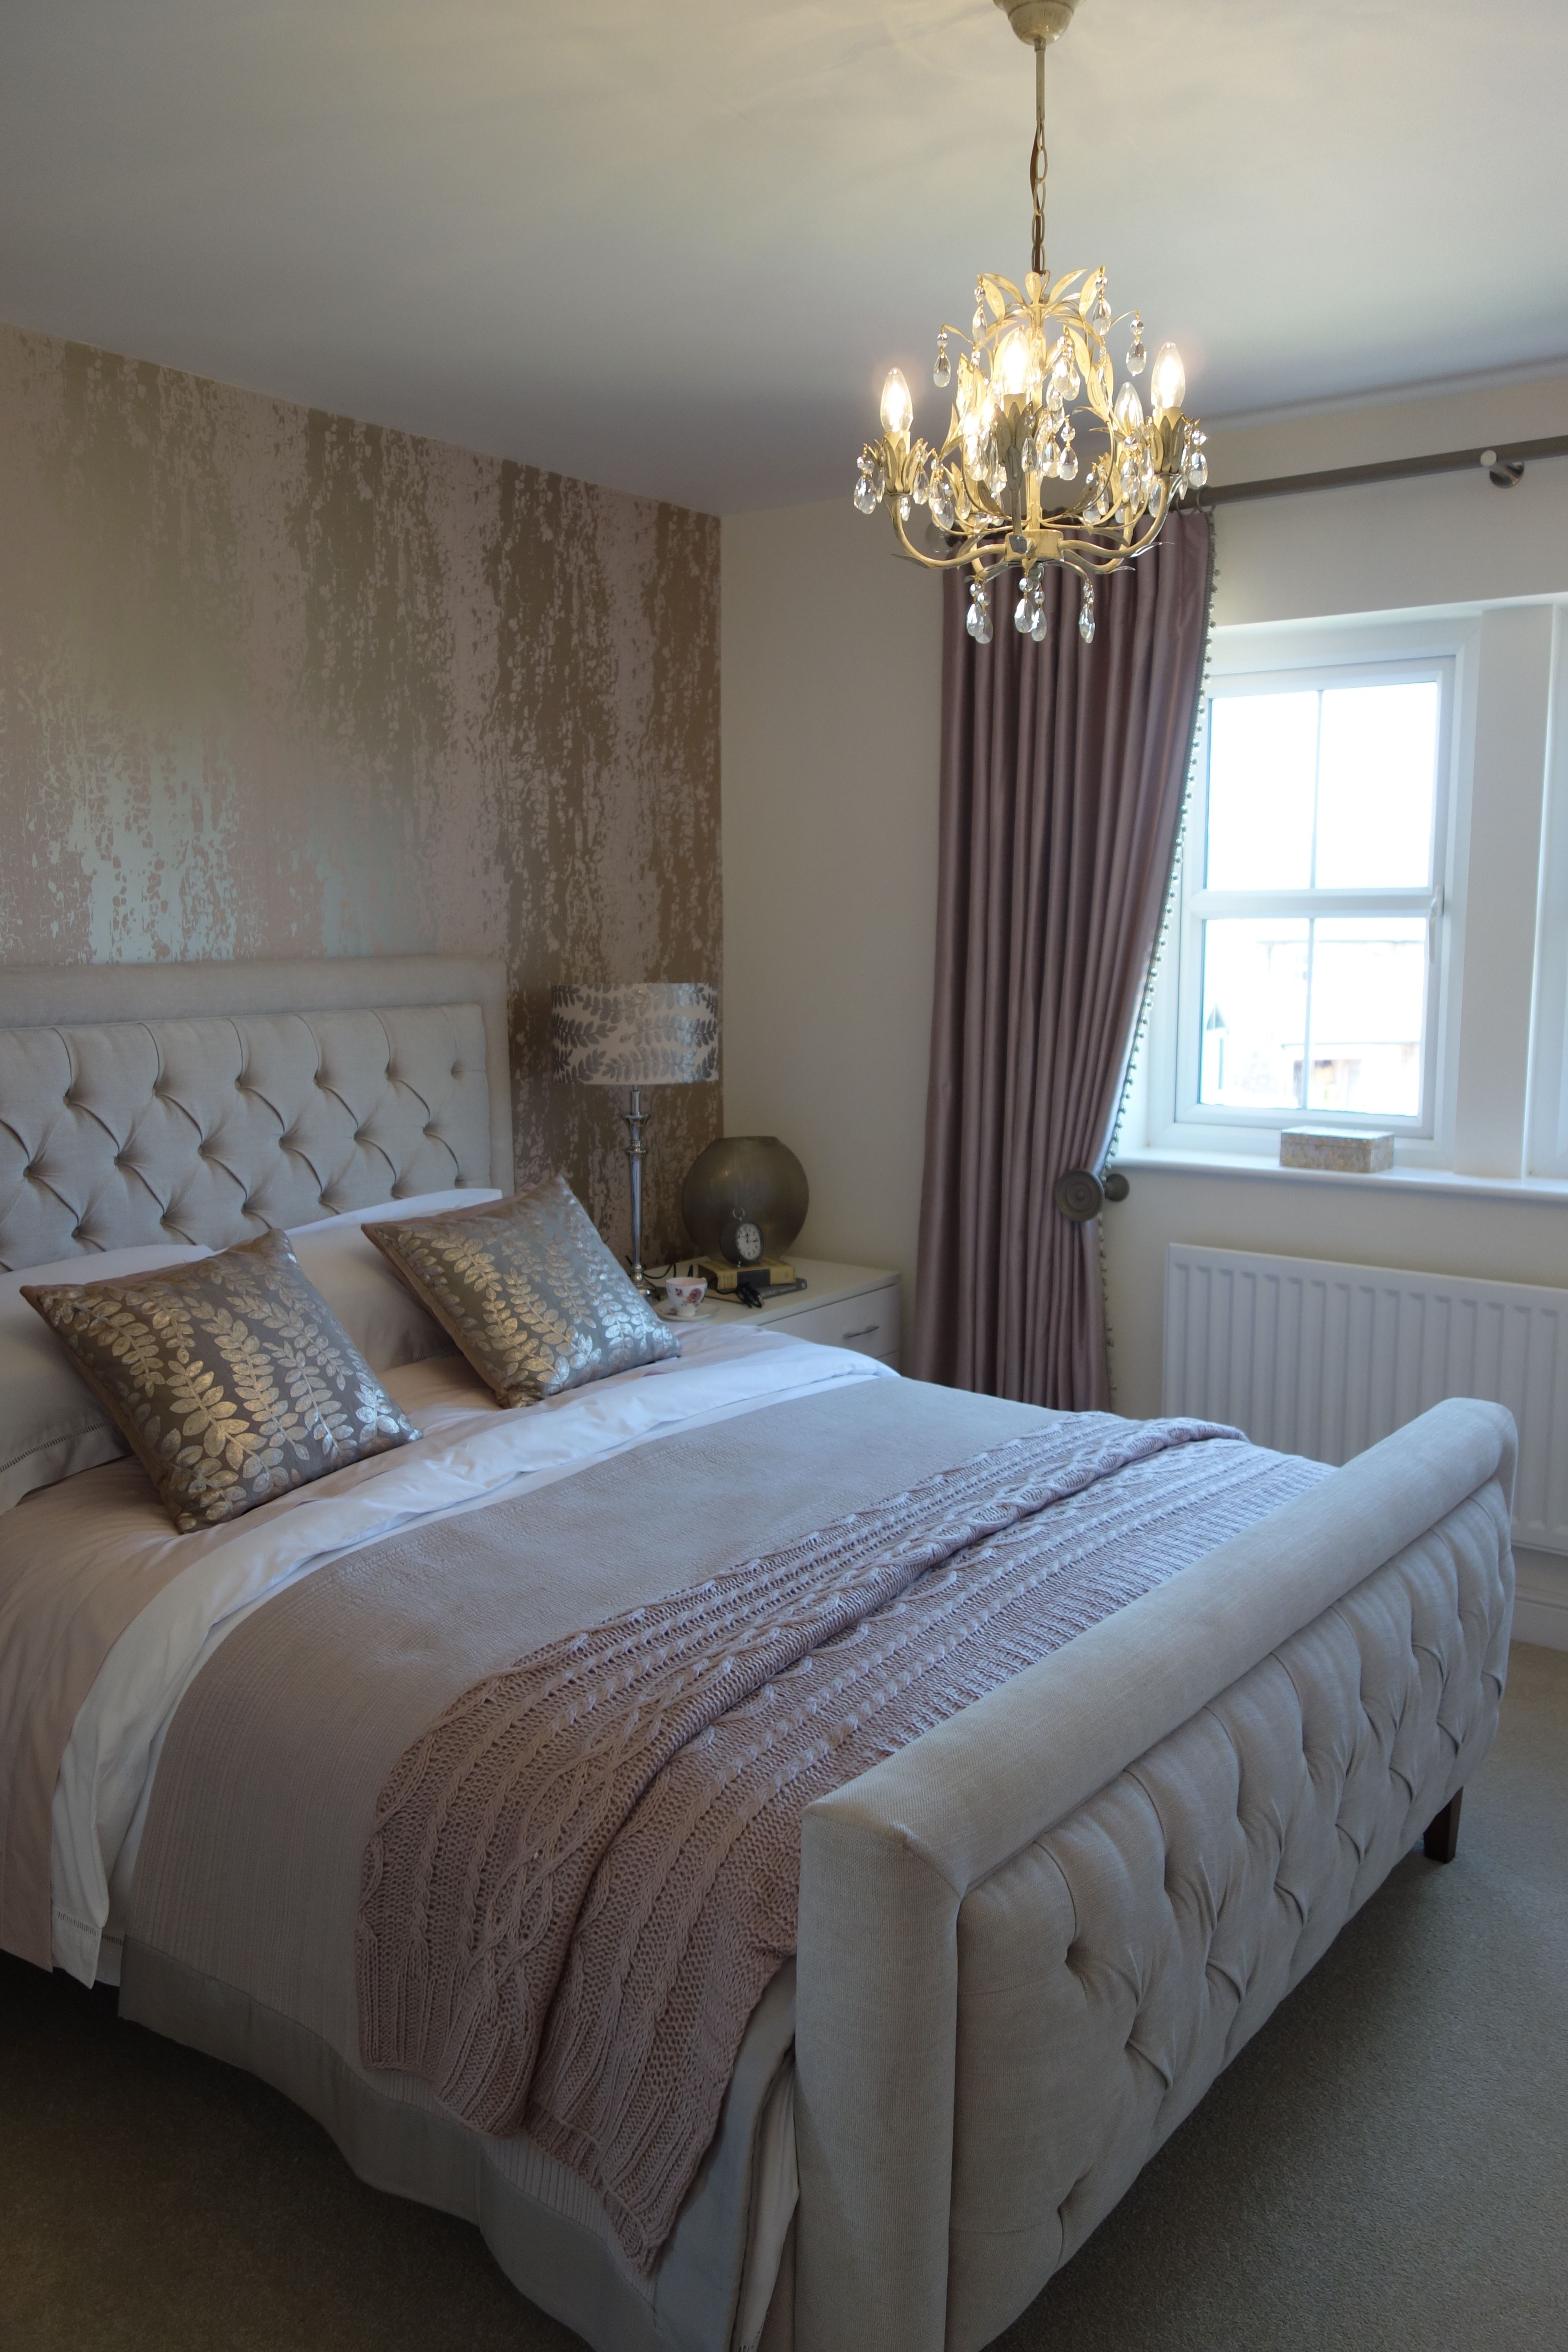 Show home opens at Cairns Chase in Stainburn